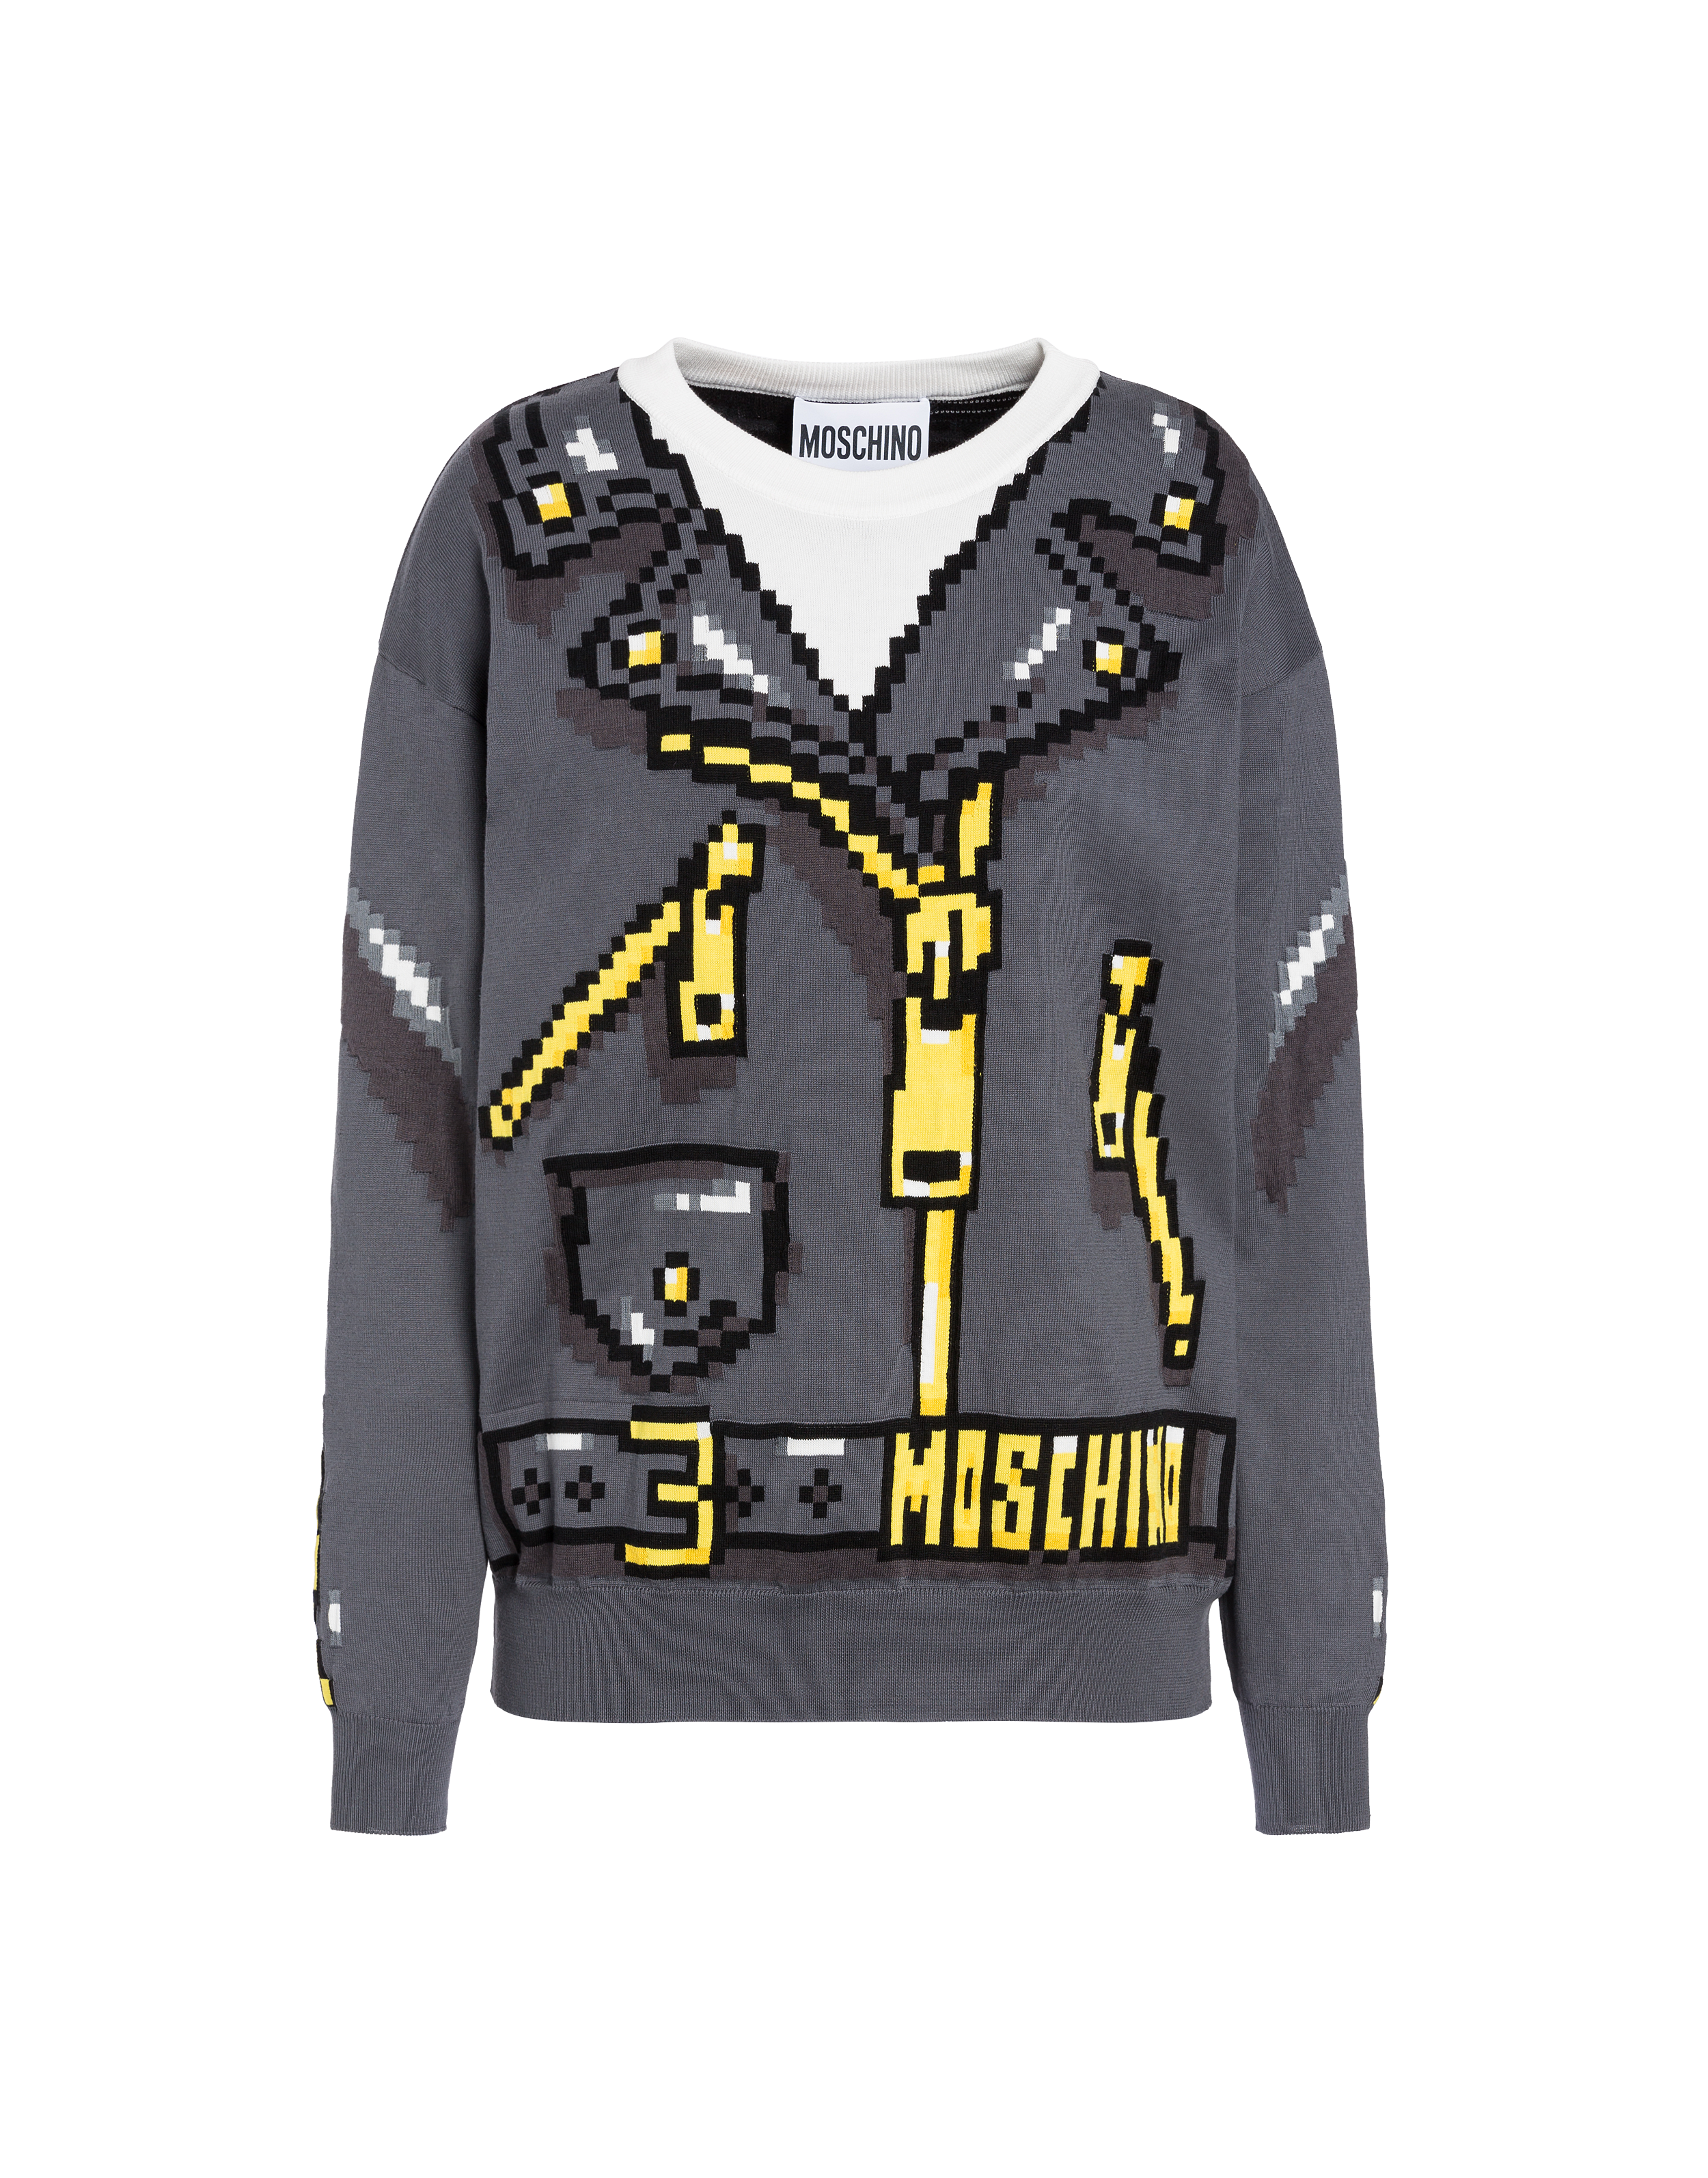 Moschino X The Sims Pixel Capsule Collection! 